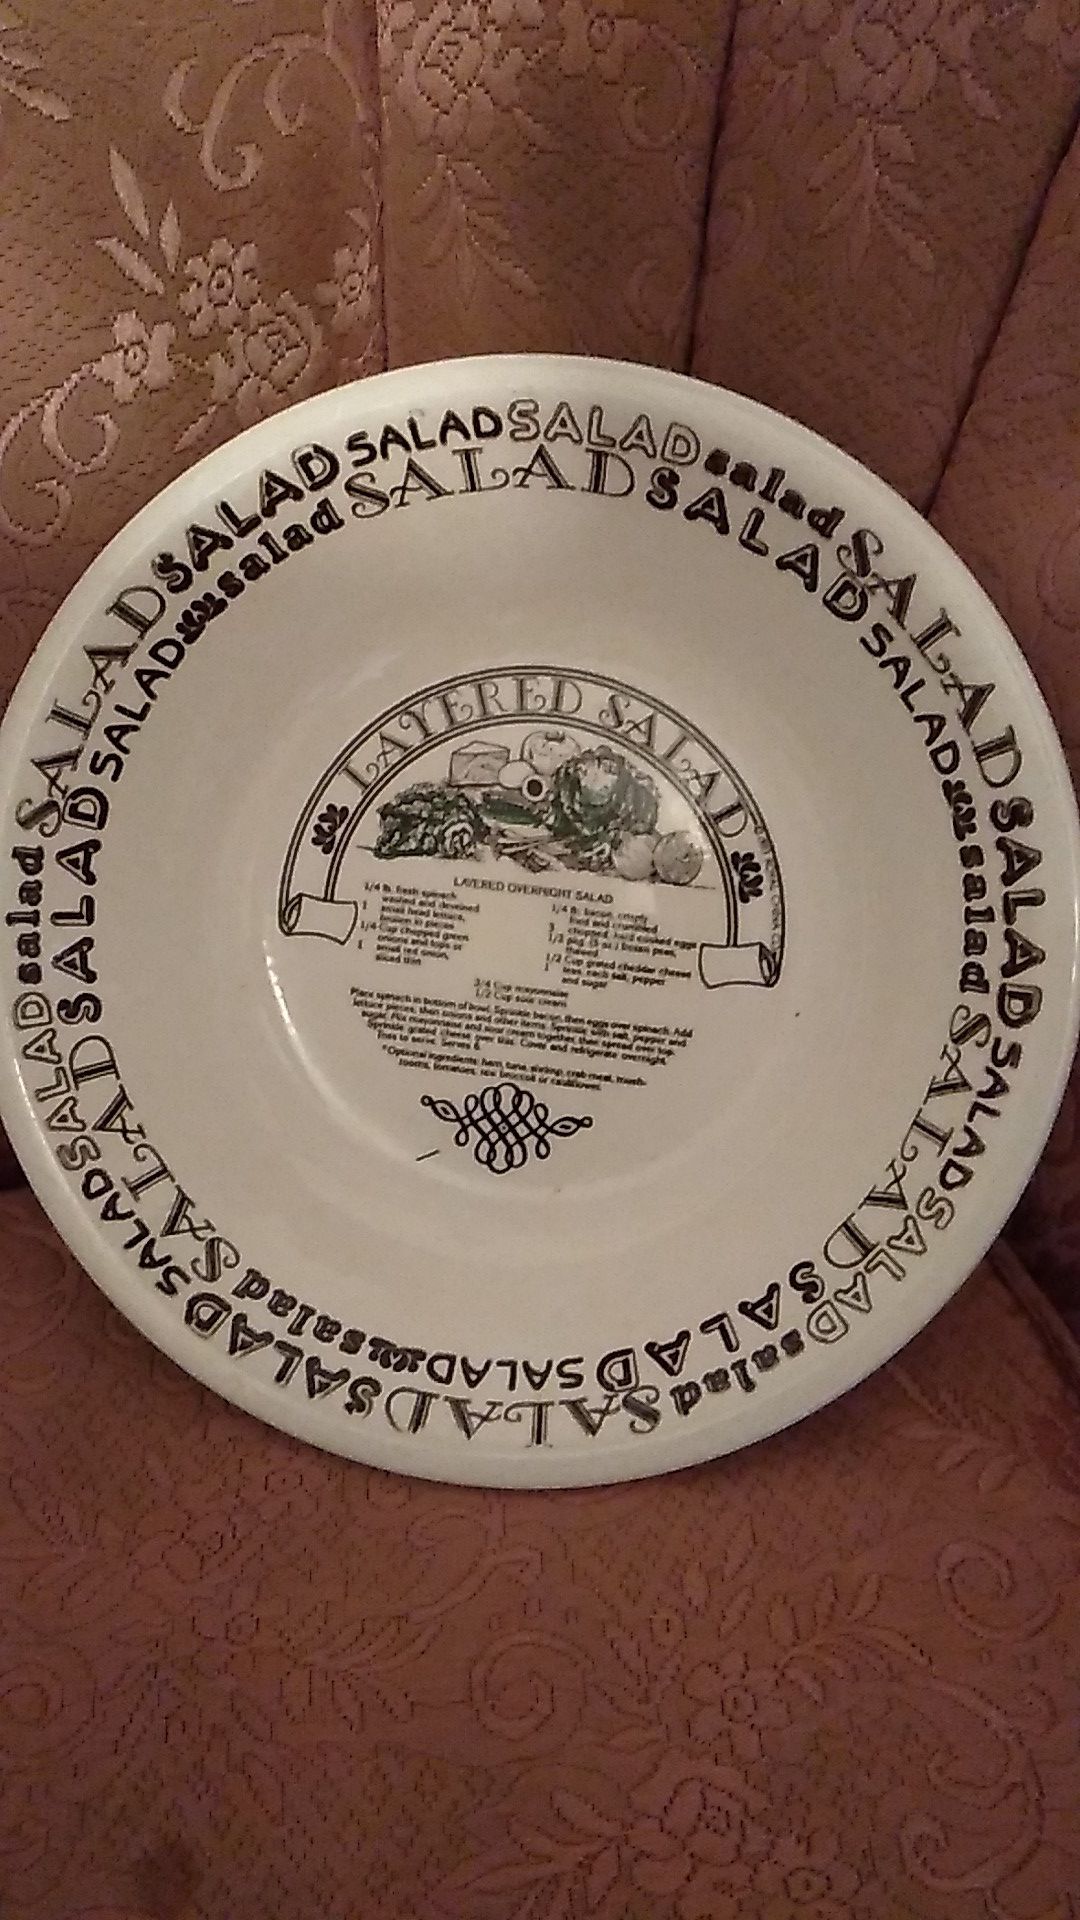 Salad Bowl By Royal China, Retains Cold For Long Periods, Comes With Recipe For Overnight Salad 🥗 Printed On Bottom Of Bowl 🥣.